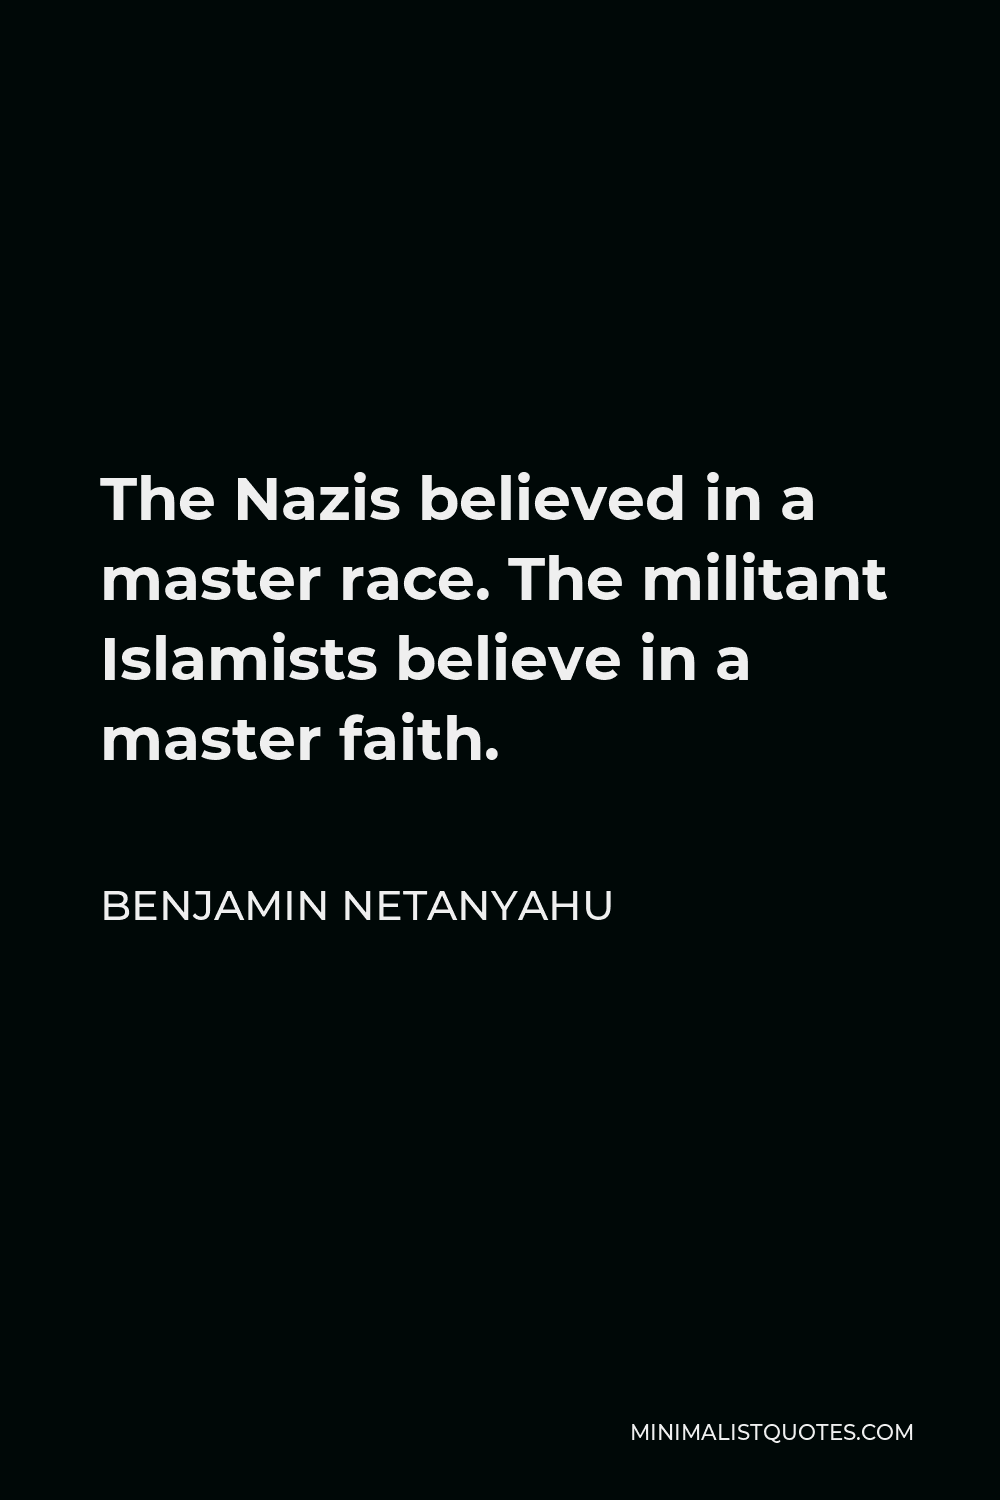 Benjamin Netanyahu Quote - The Nazis believed in a master race. The militant Islamists believe in a master faith.